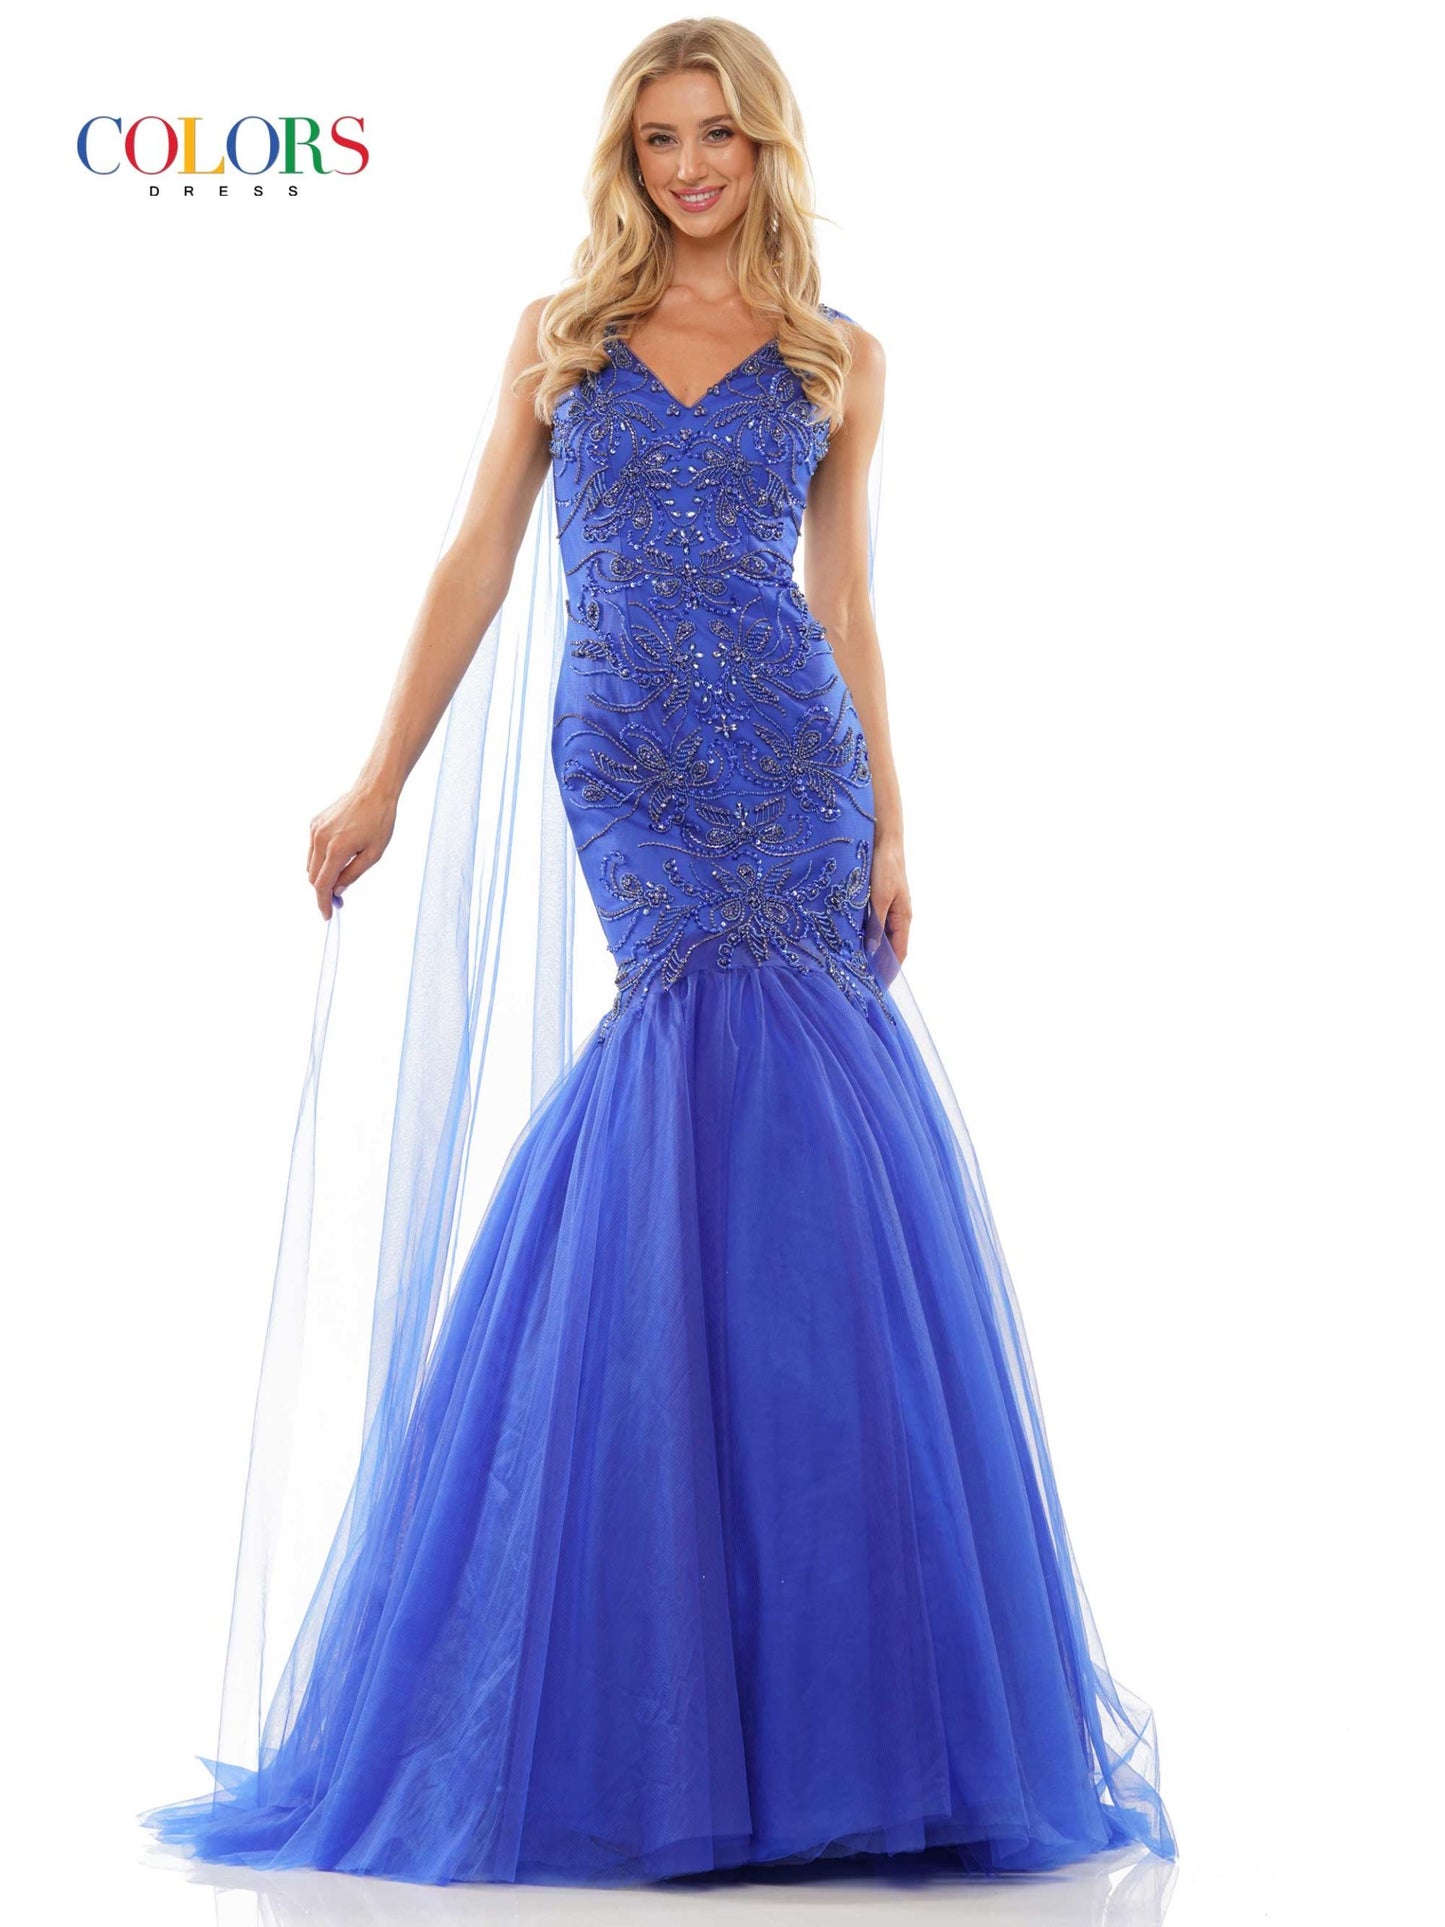 Colors Dress 2993 Size 8 Royal Blue Mermaid Prom Dress with Capes